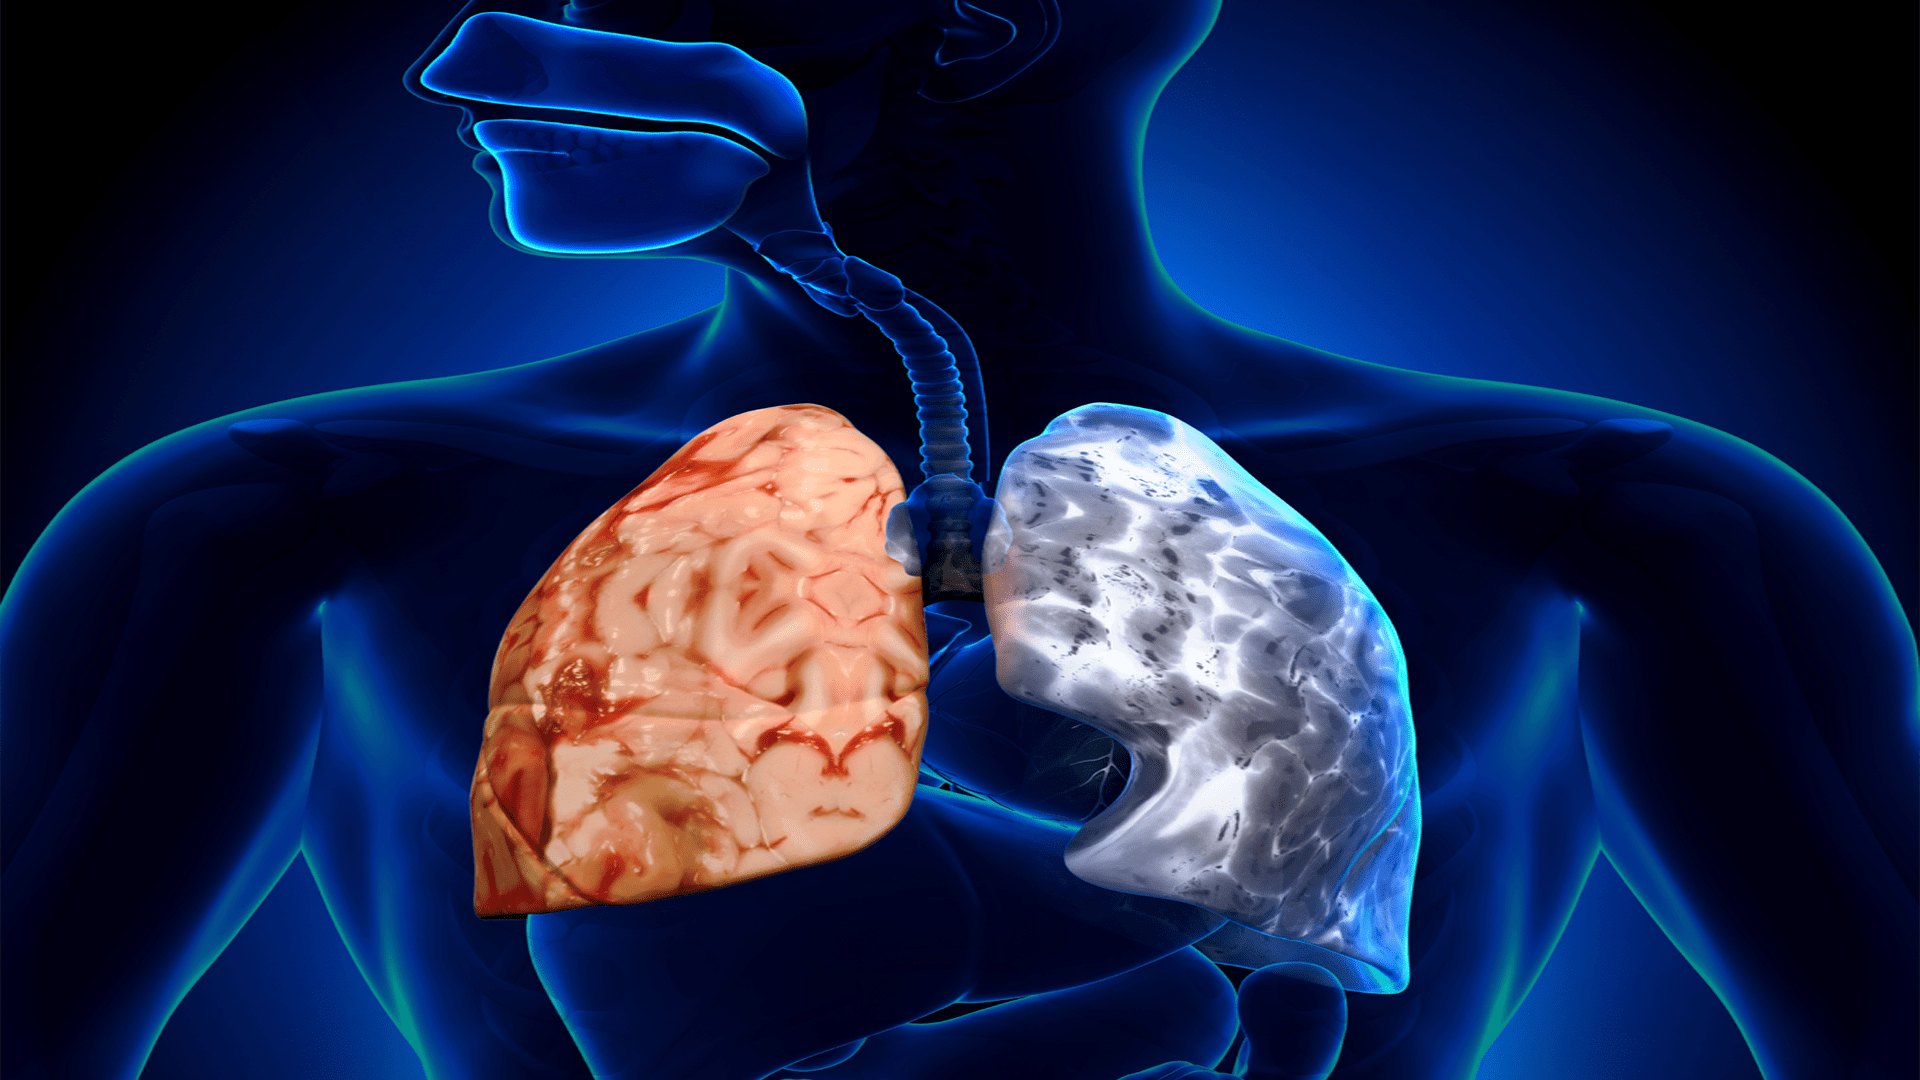 COPD: A Silent Threat – Prevalence, Deaths & Economic Costs Explained